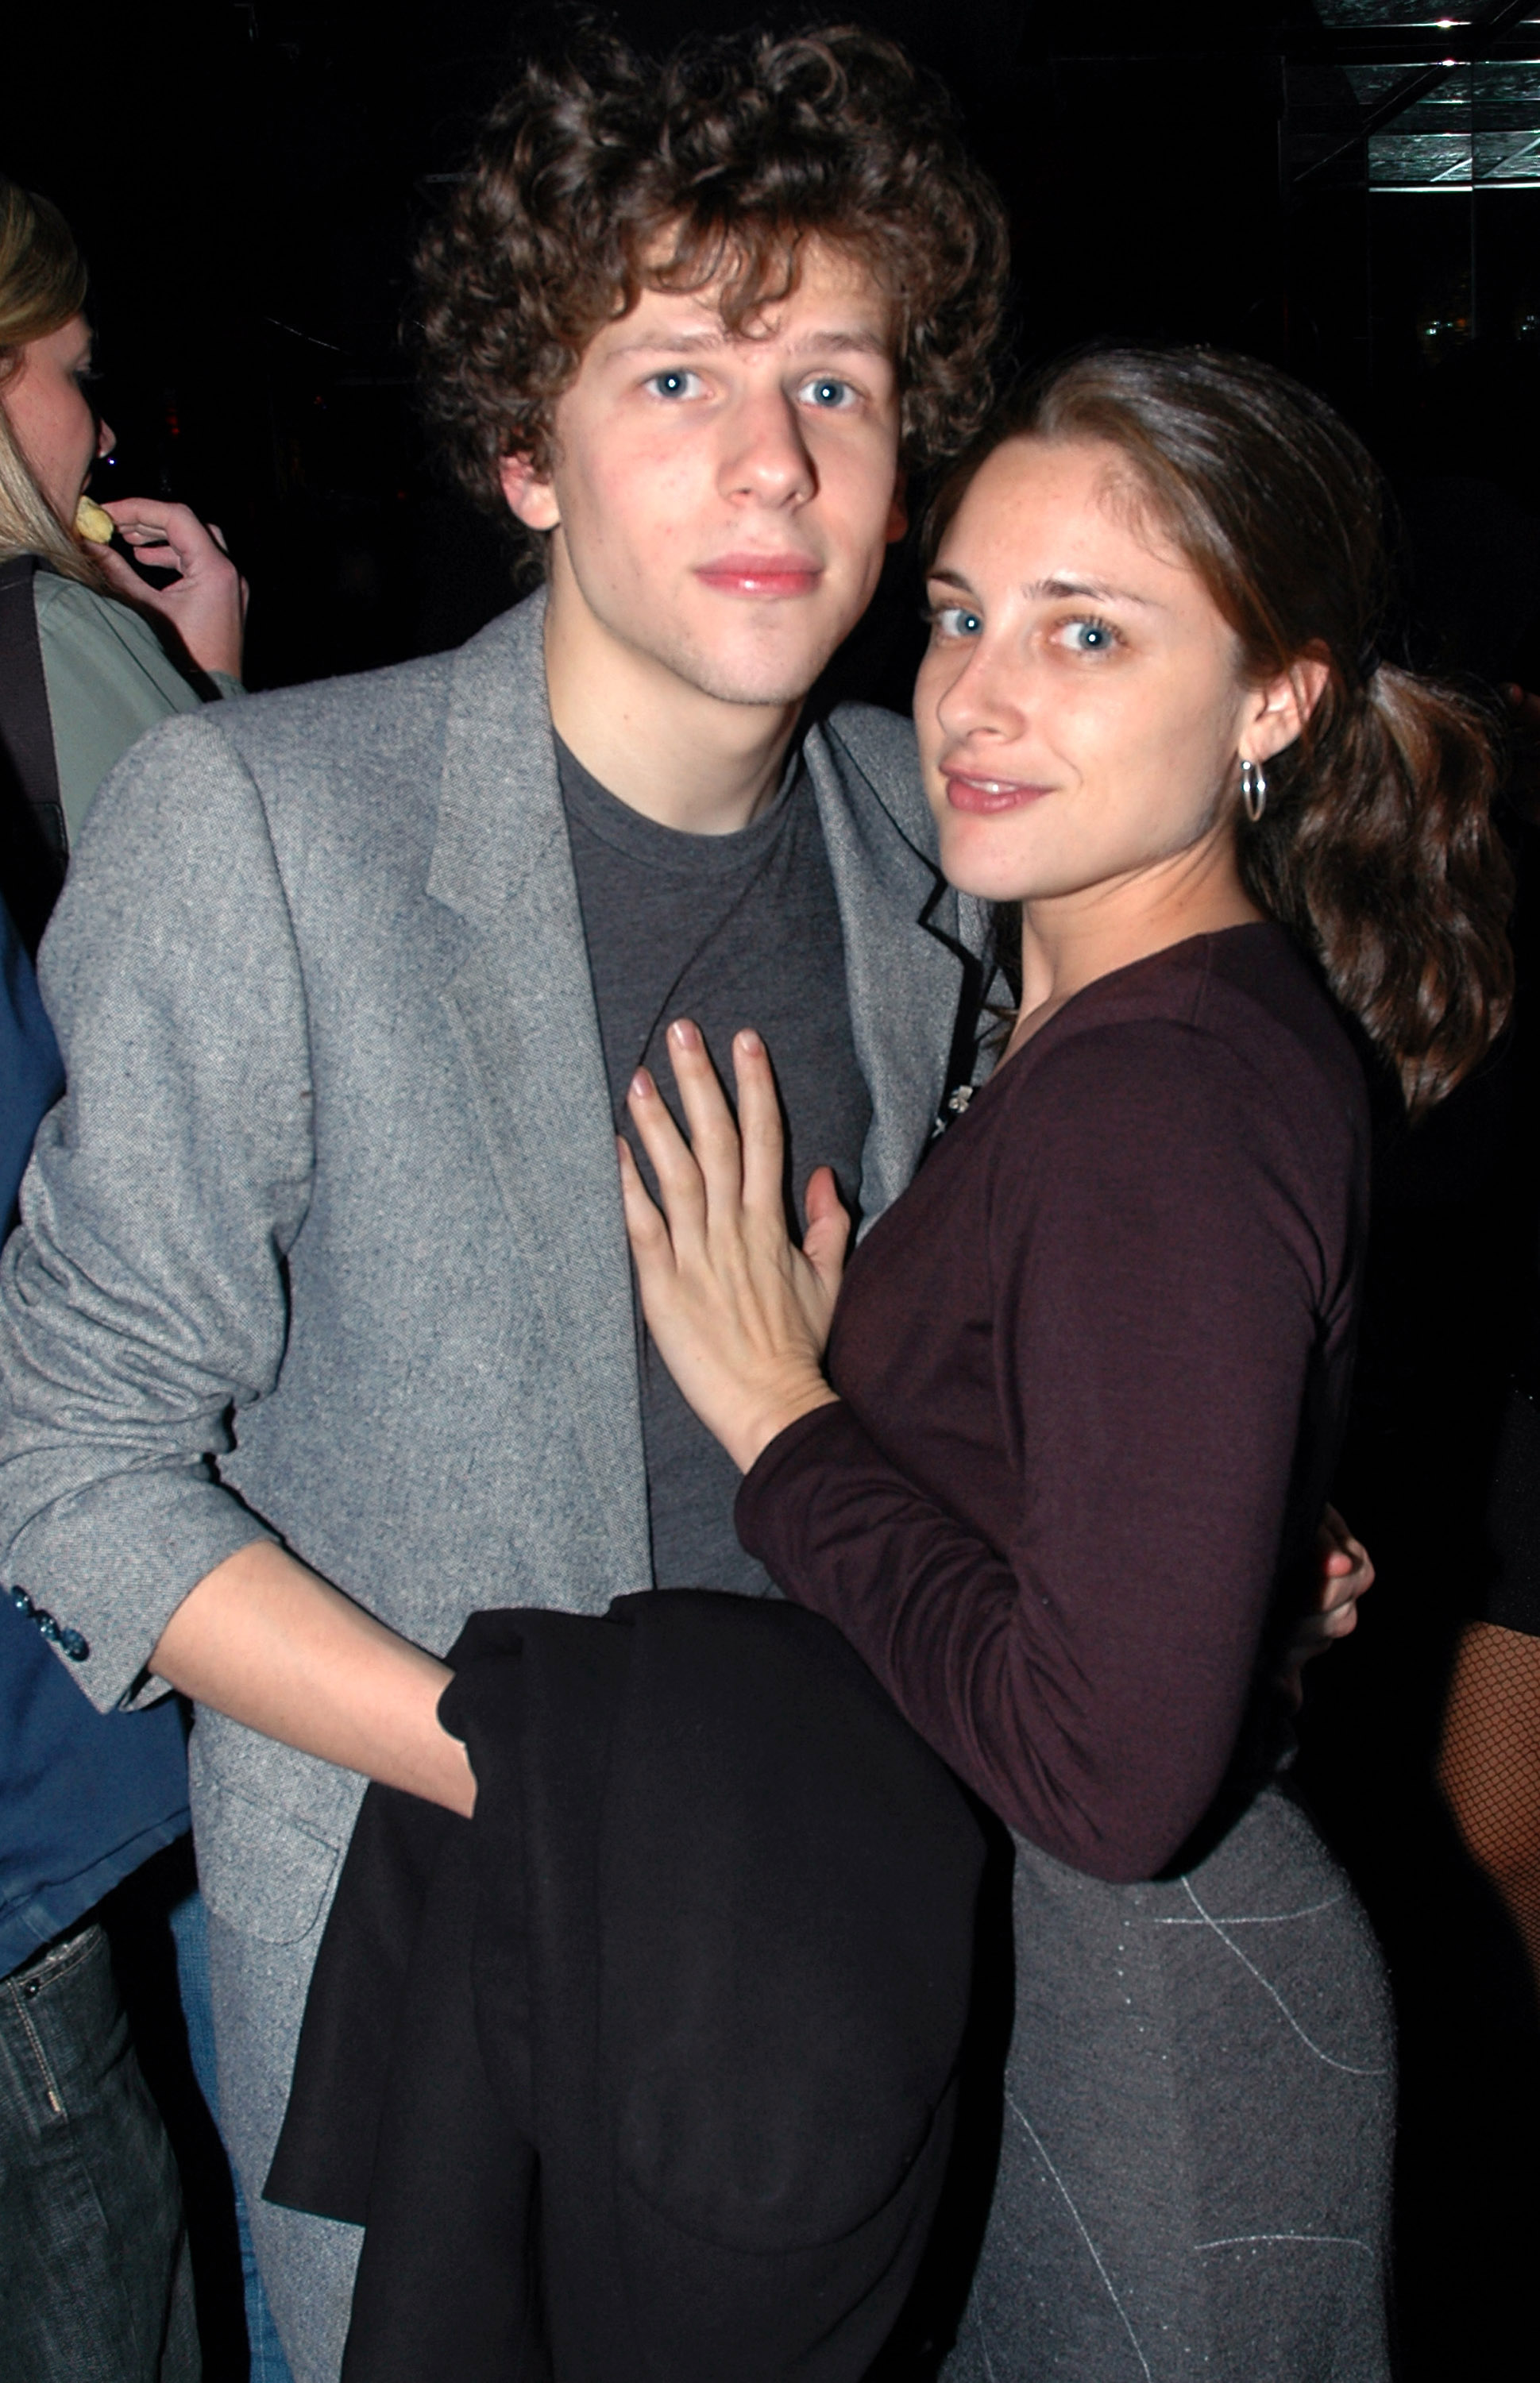 Jesse Eisenberg and Anna Strout during "Sarah Silverman: Jesus is Magic" premiere after party at Rock Candy in New York City, New York, on November 7, 2005. | Source: Getty Images